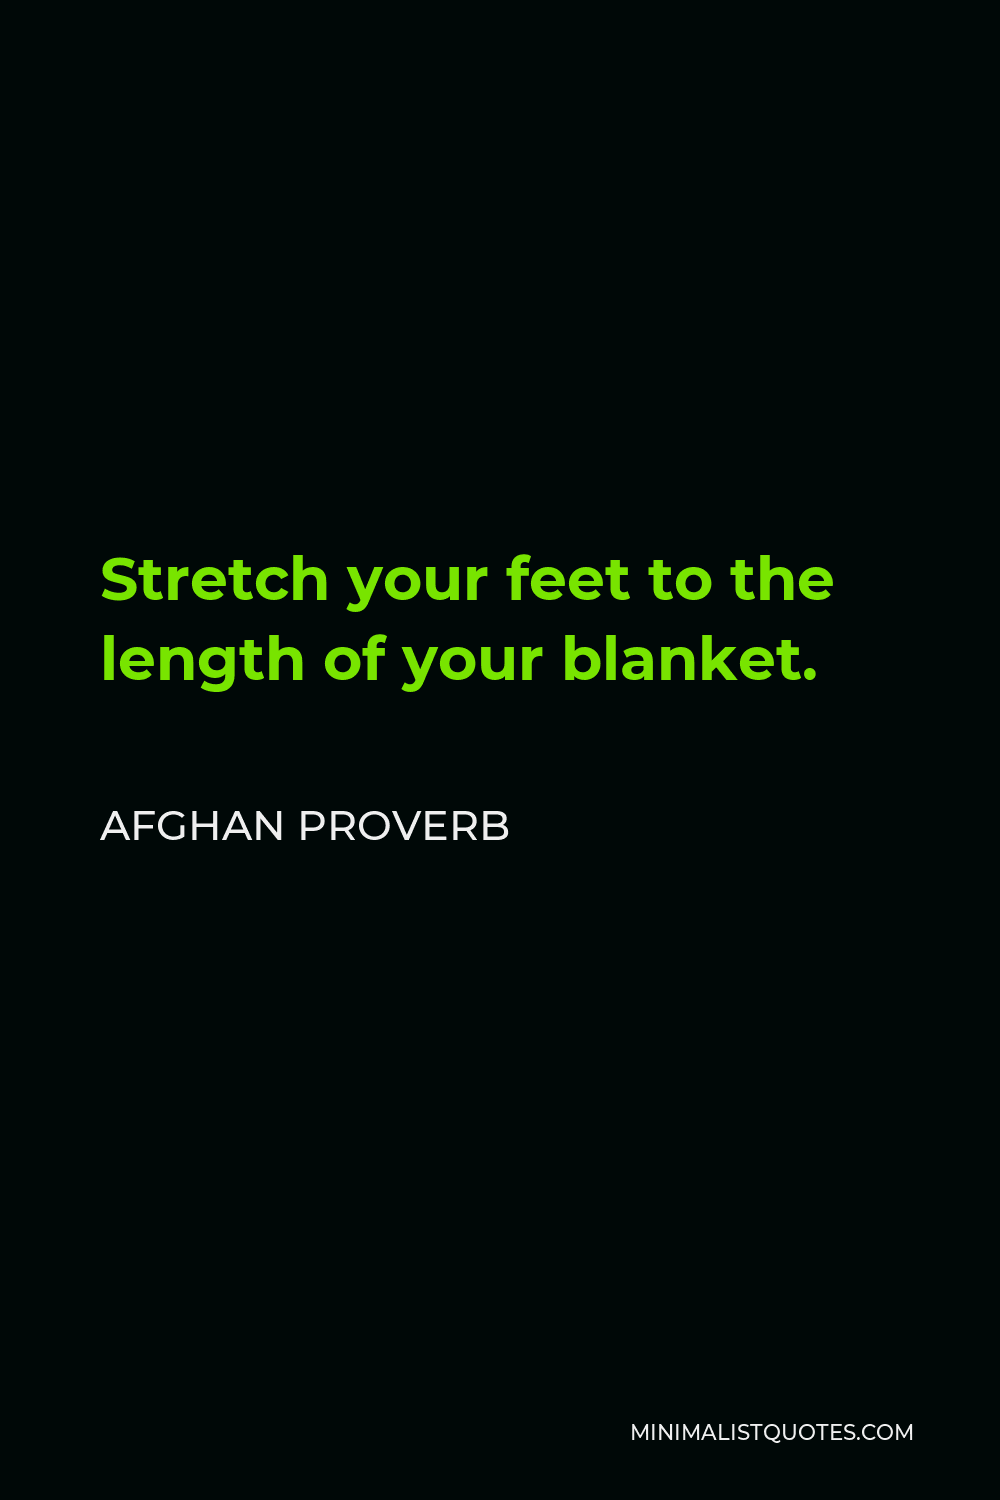 Afghan Proverb Quote - Stretch your feet to the length of your blanket.